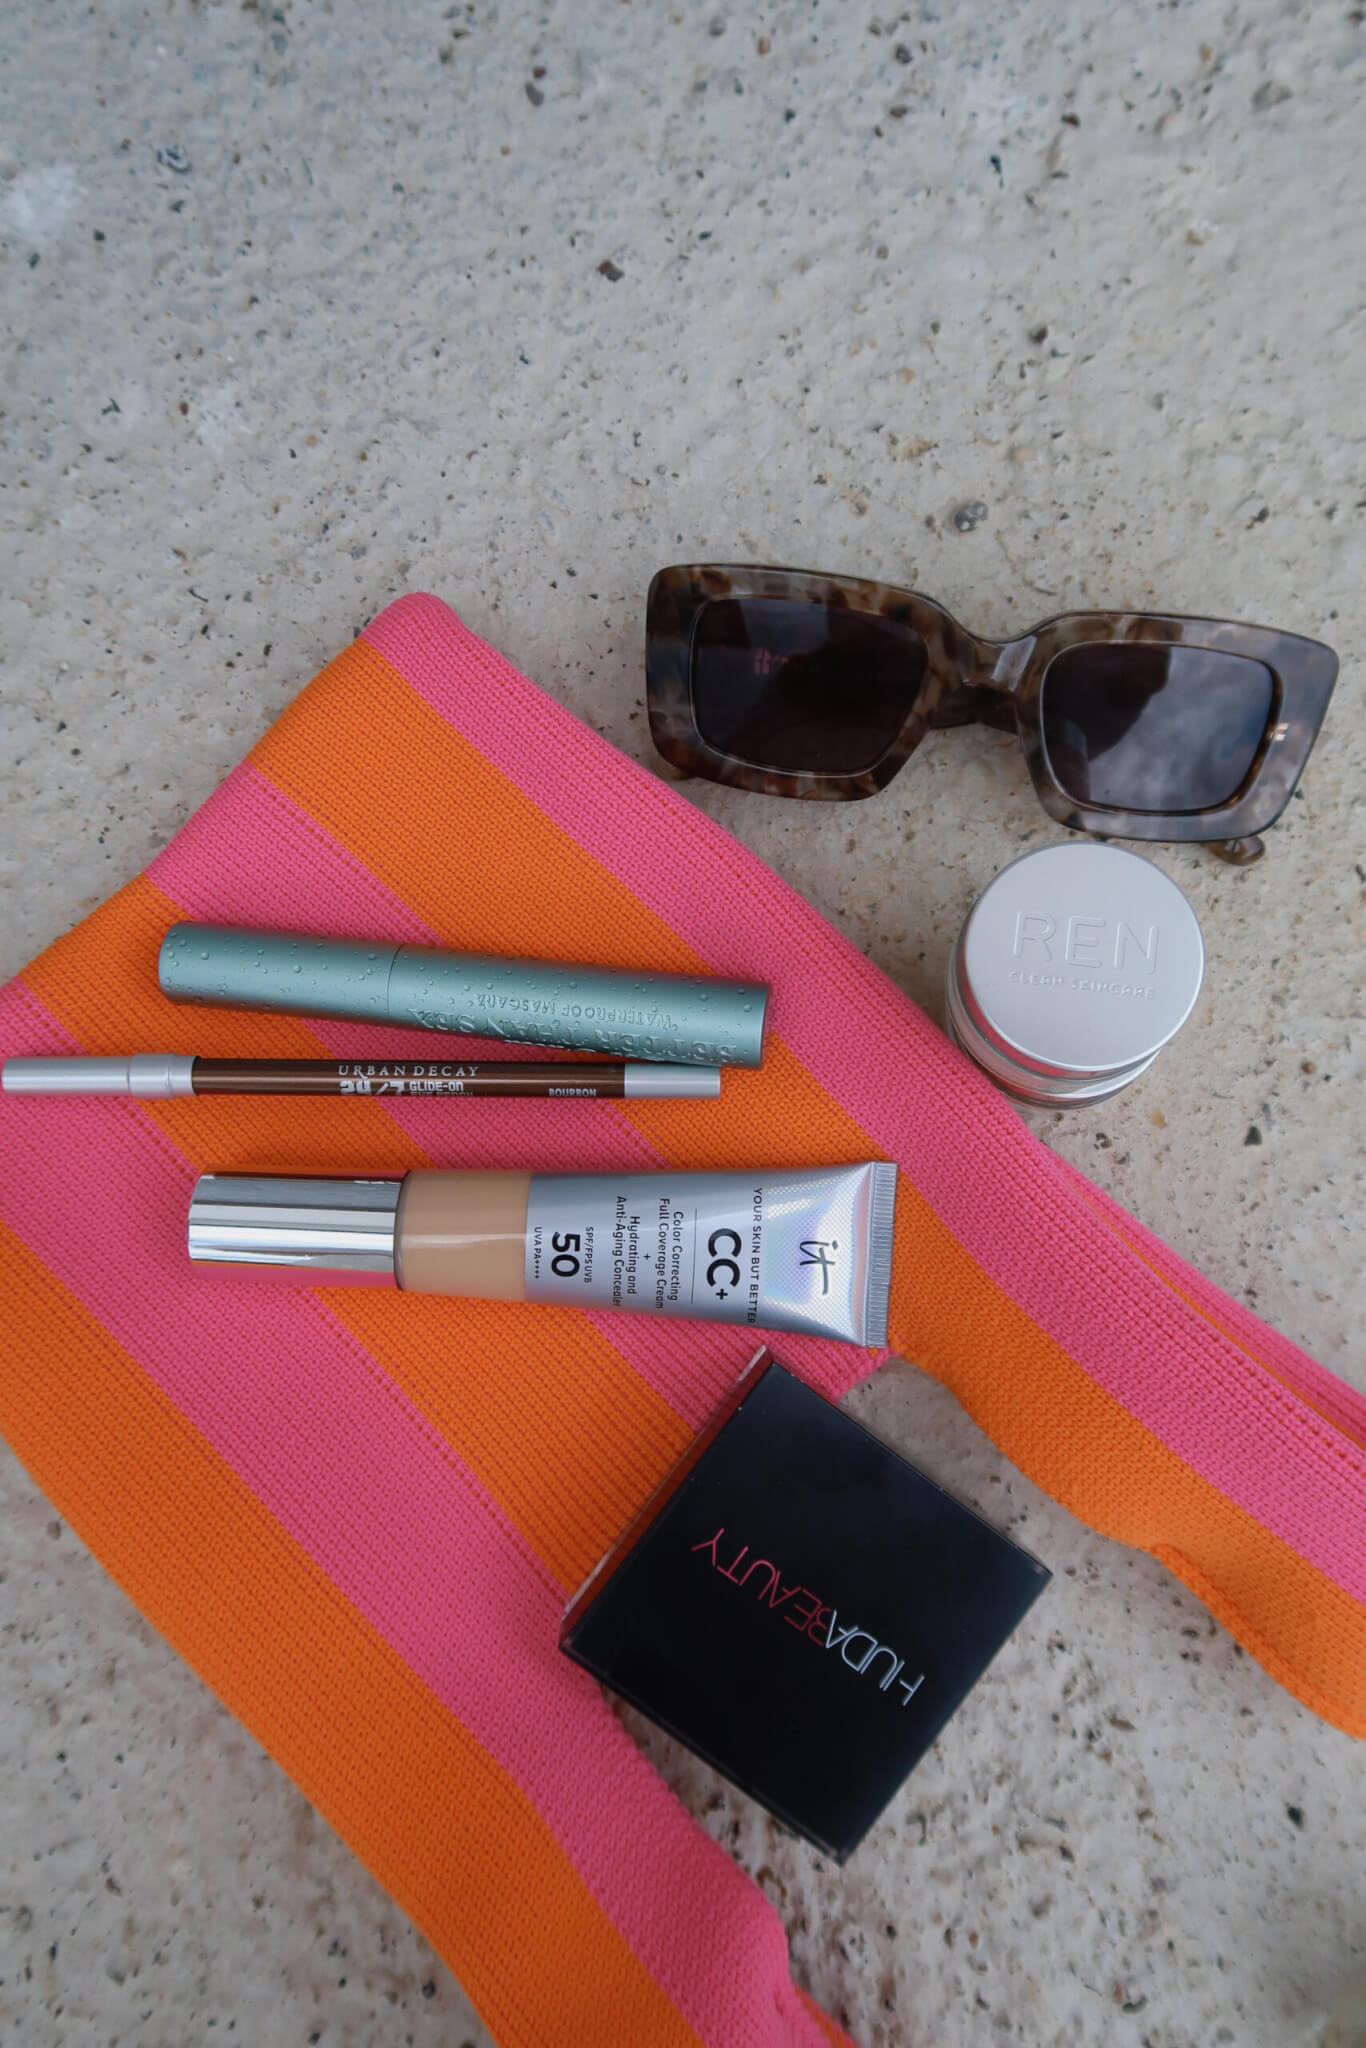 Tezza-9052-scaled Summer Travel Essentials: What's in My Holiday Bag